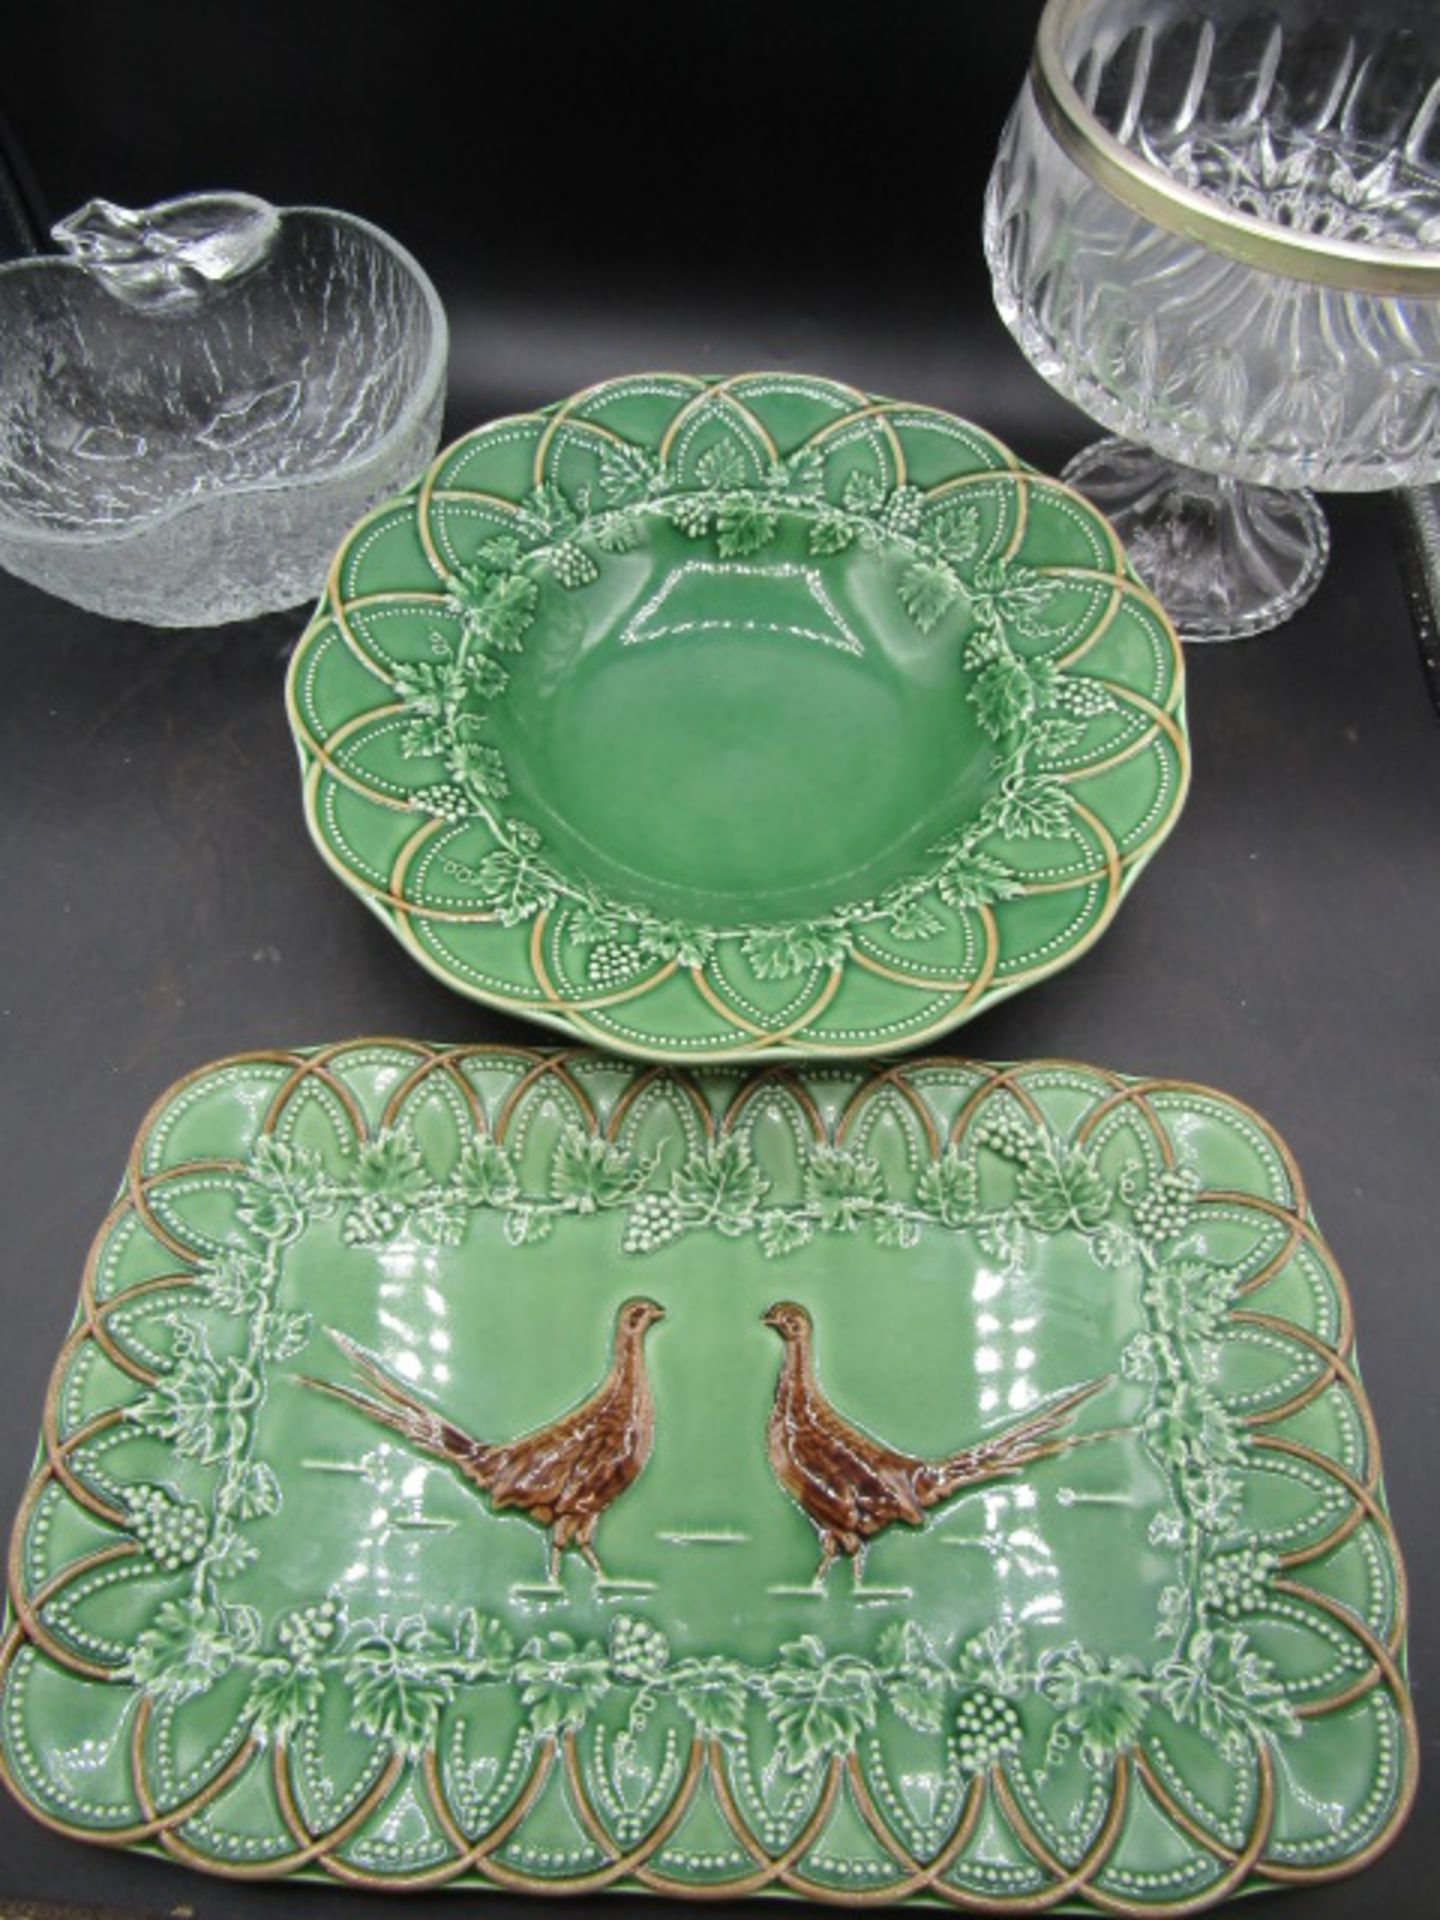 Portuguese pheasant platter and bowl decorated with vines along with 2 glass dishes